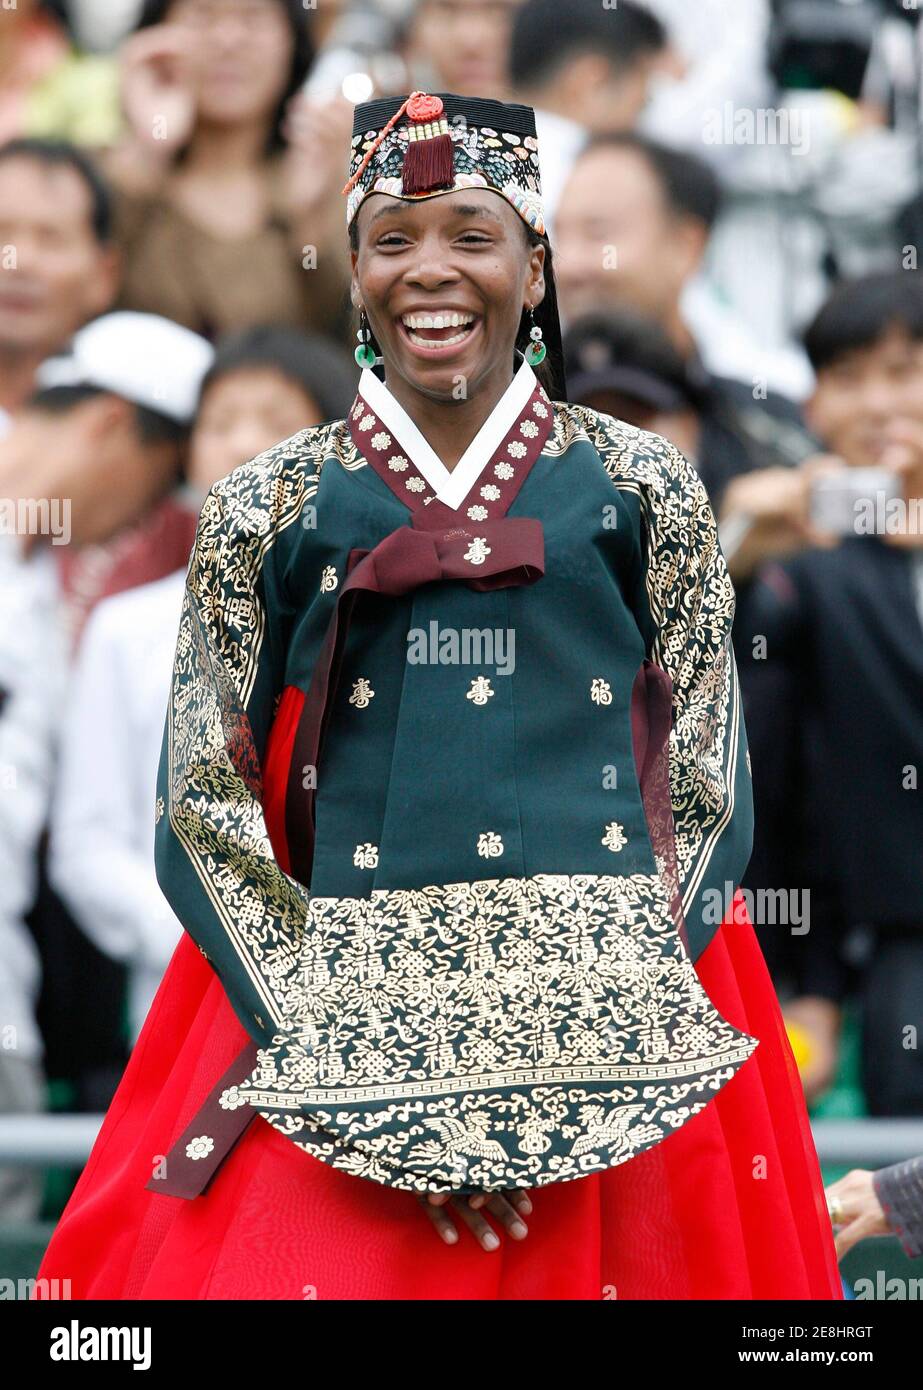 Venus Williams of the U.S. wearing a South Korean traditional dress smiles after her winning the match against Maria Kirilenko of Russia at the Korea Open tennis tournament final in Seoul September 30, 2007.  REUTERS/Jo Yong-Hak (SOUTH KOREA) Stock Photo